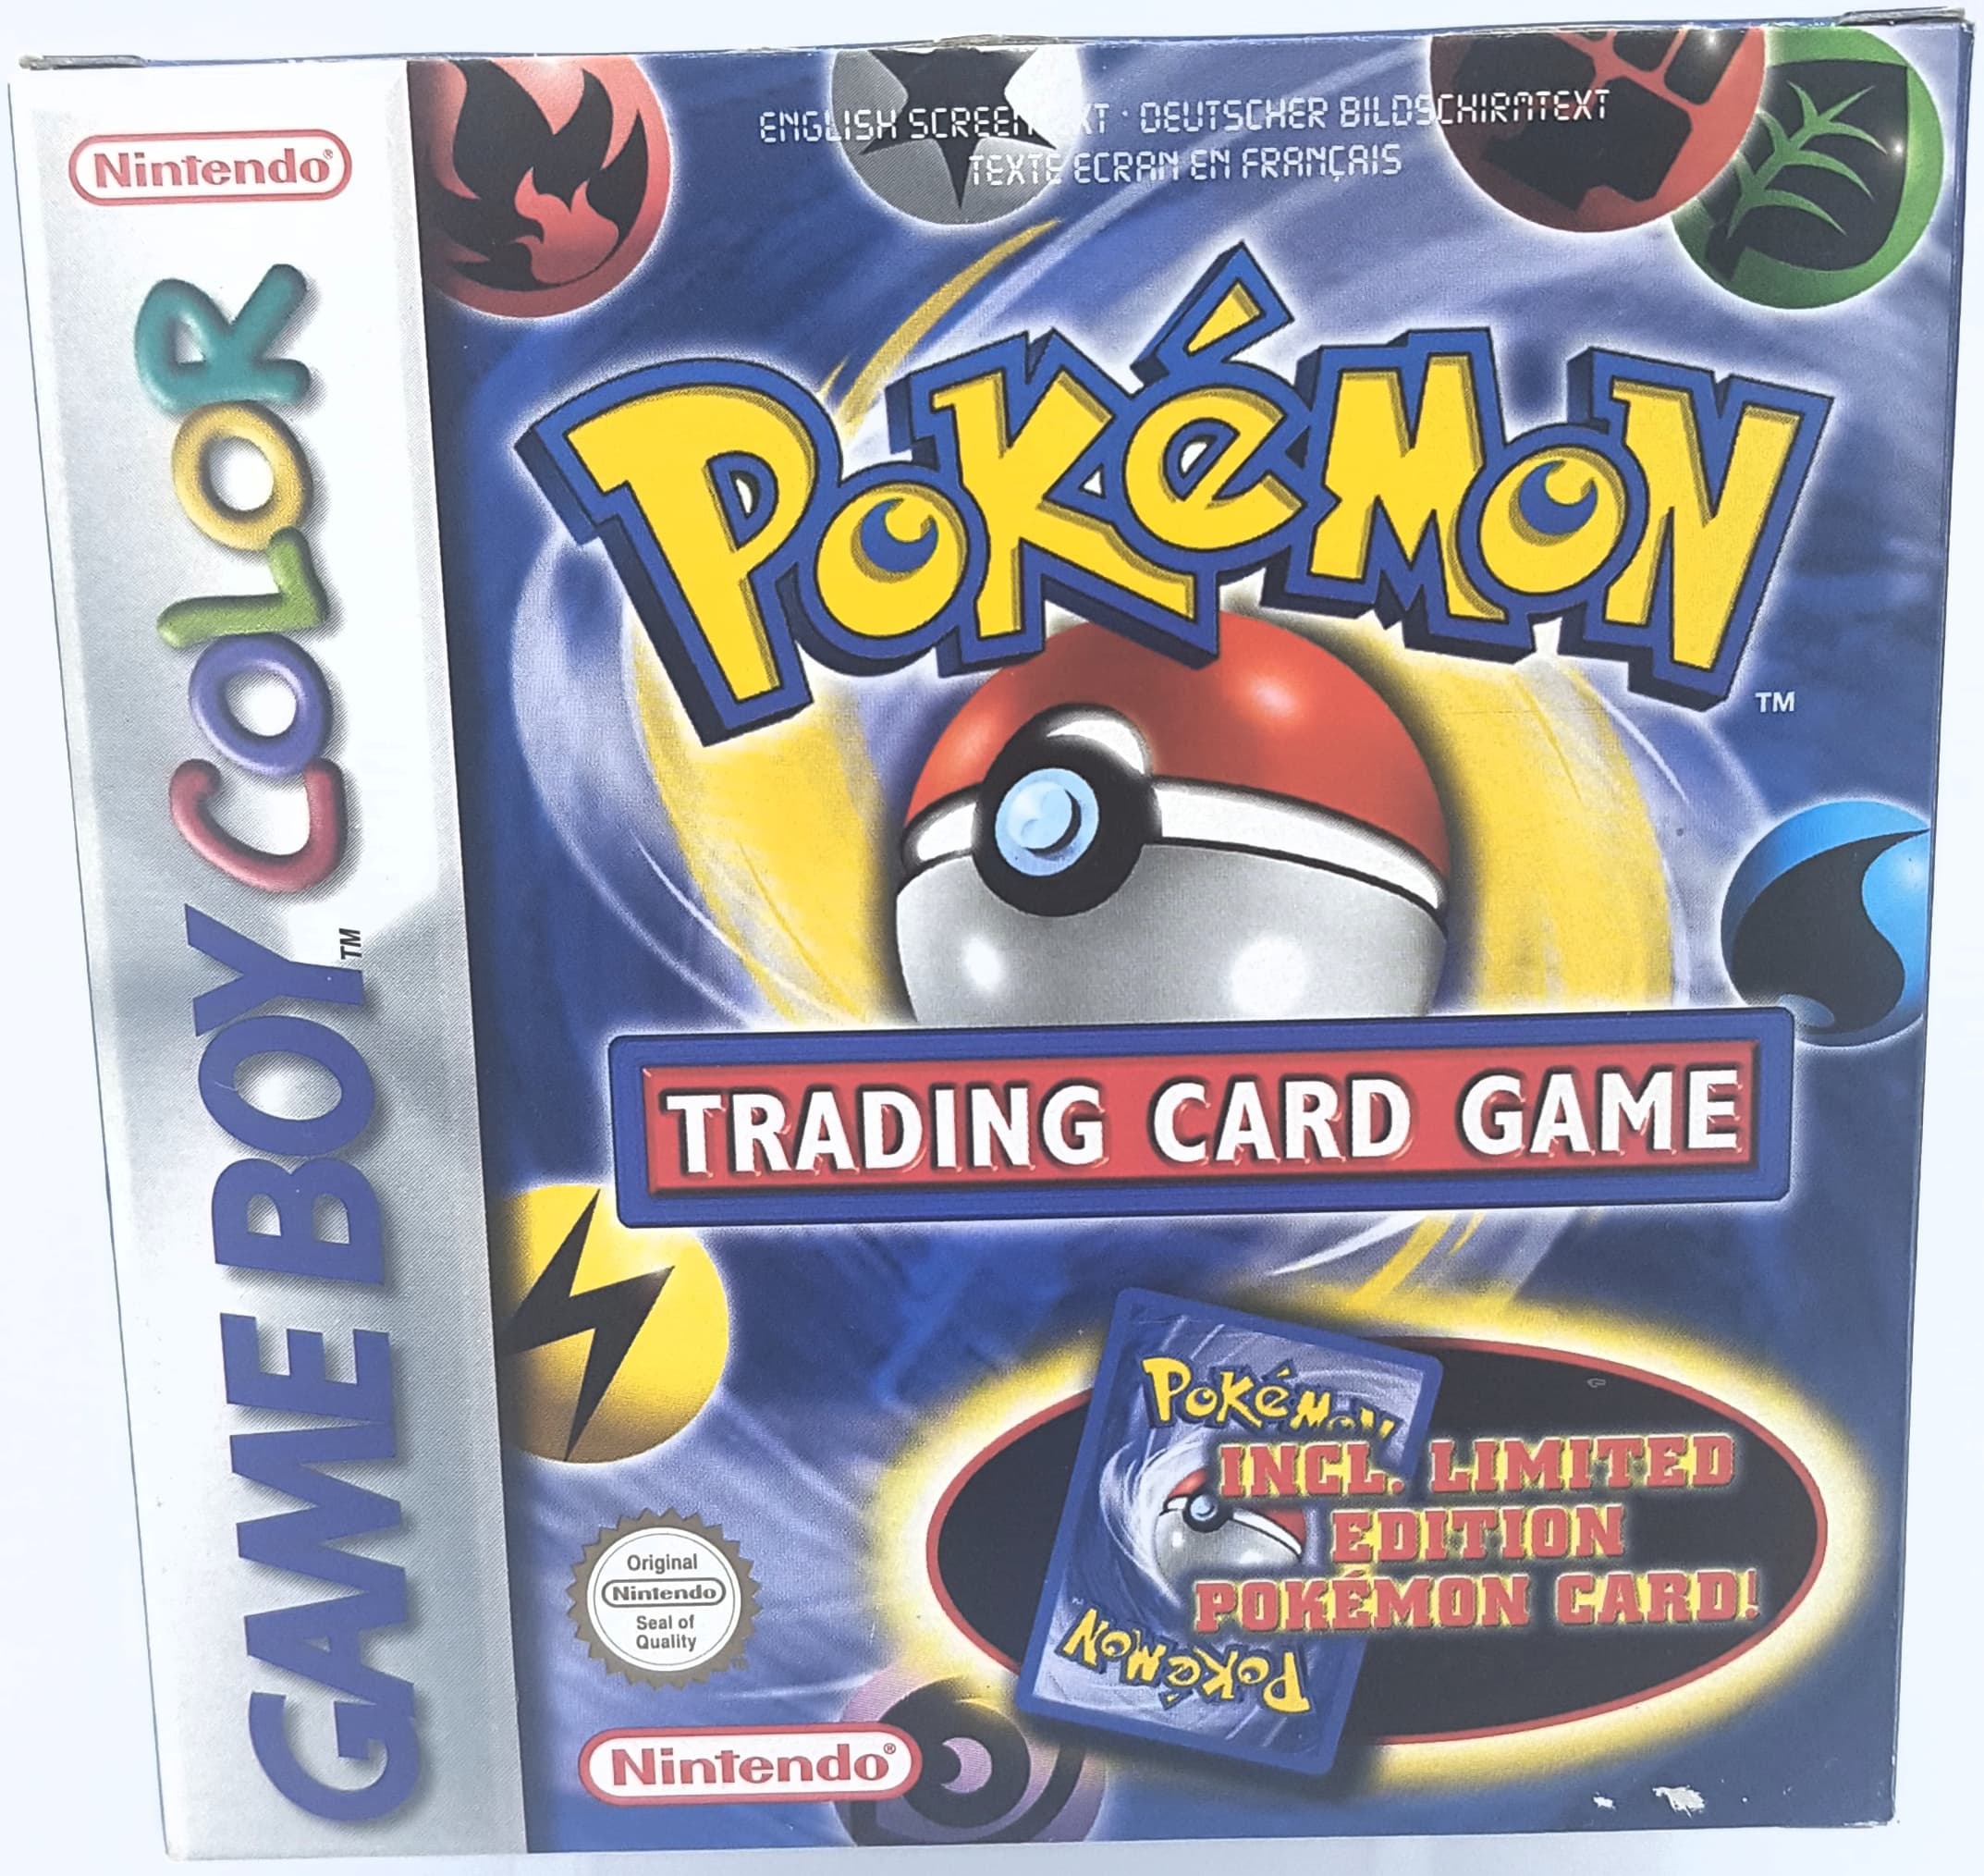 POKEMON TRADING CARD GAME - Super Gaby Games